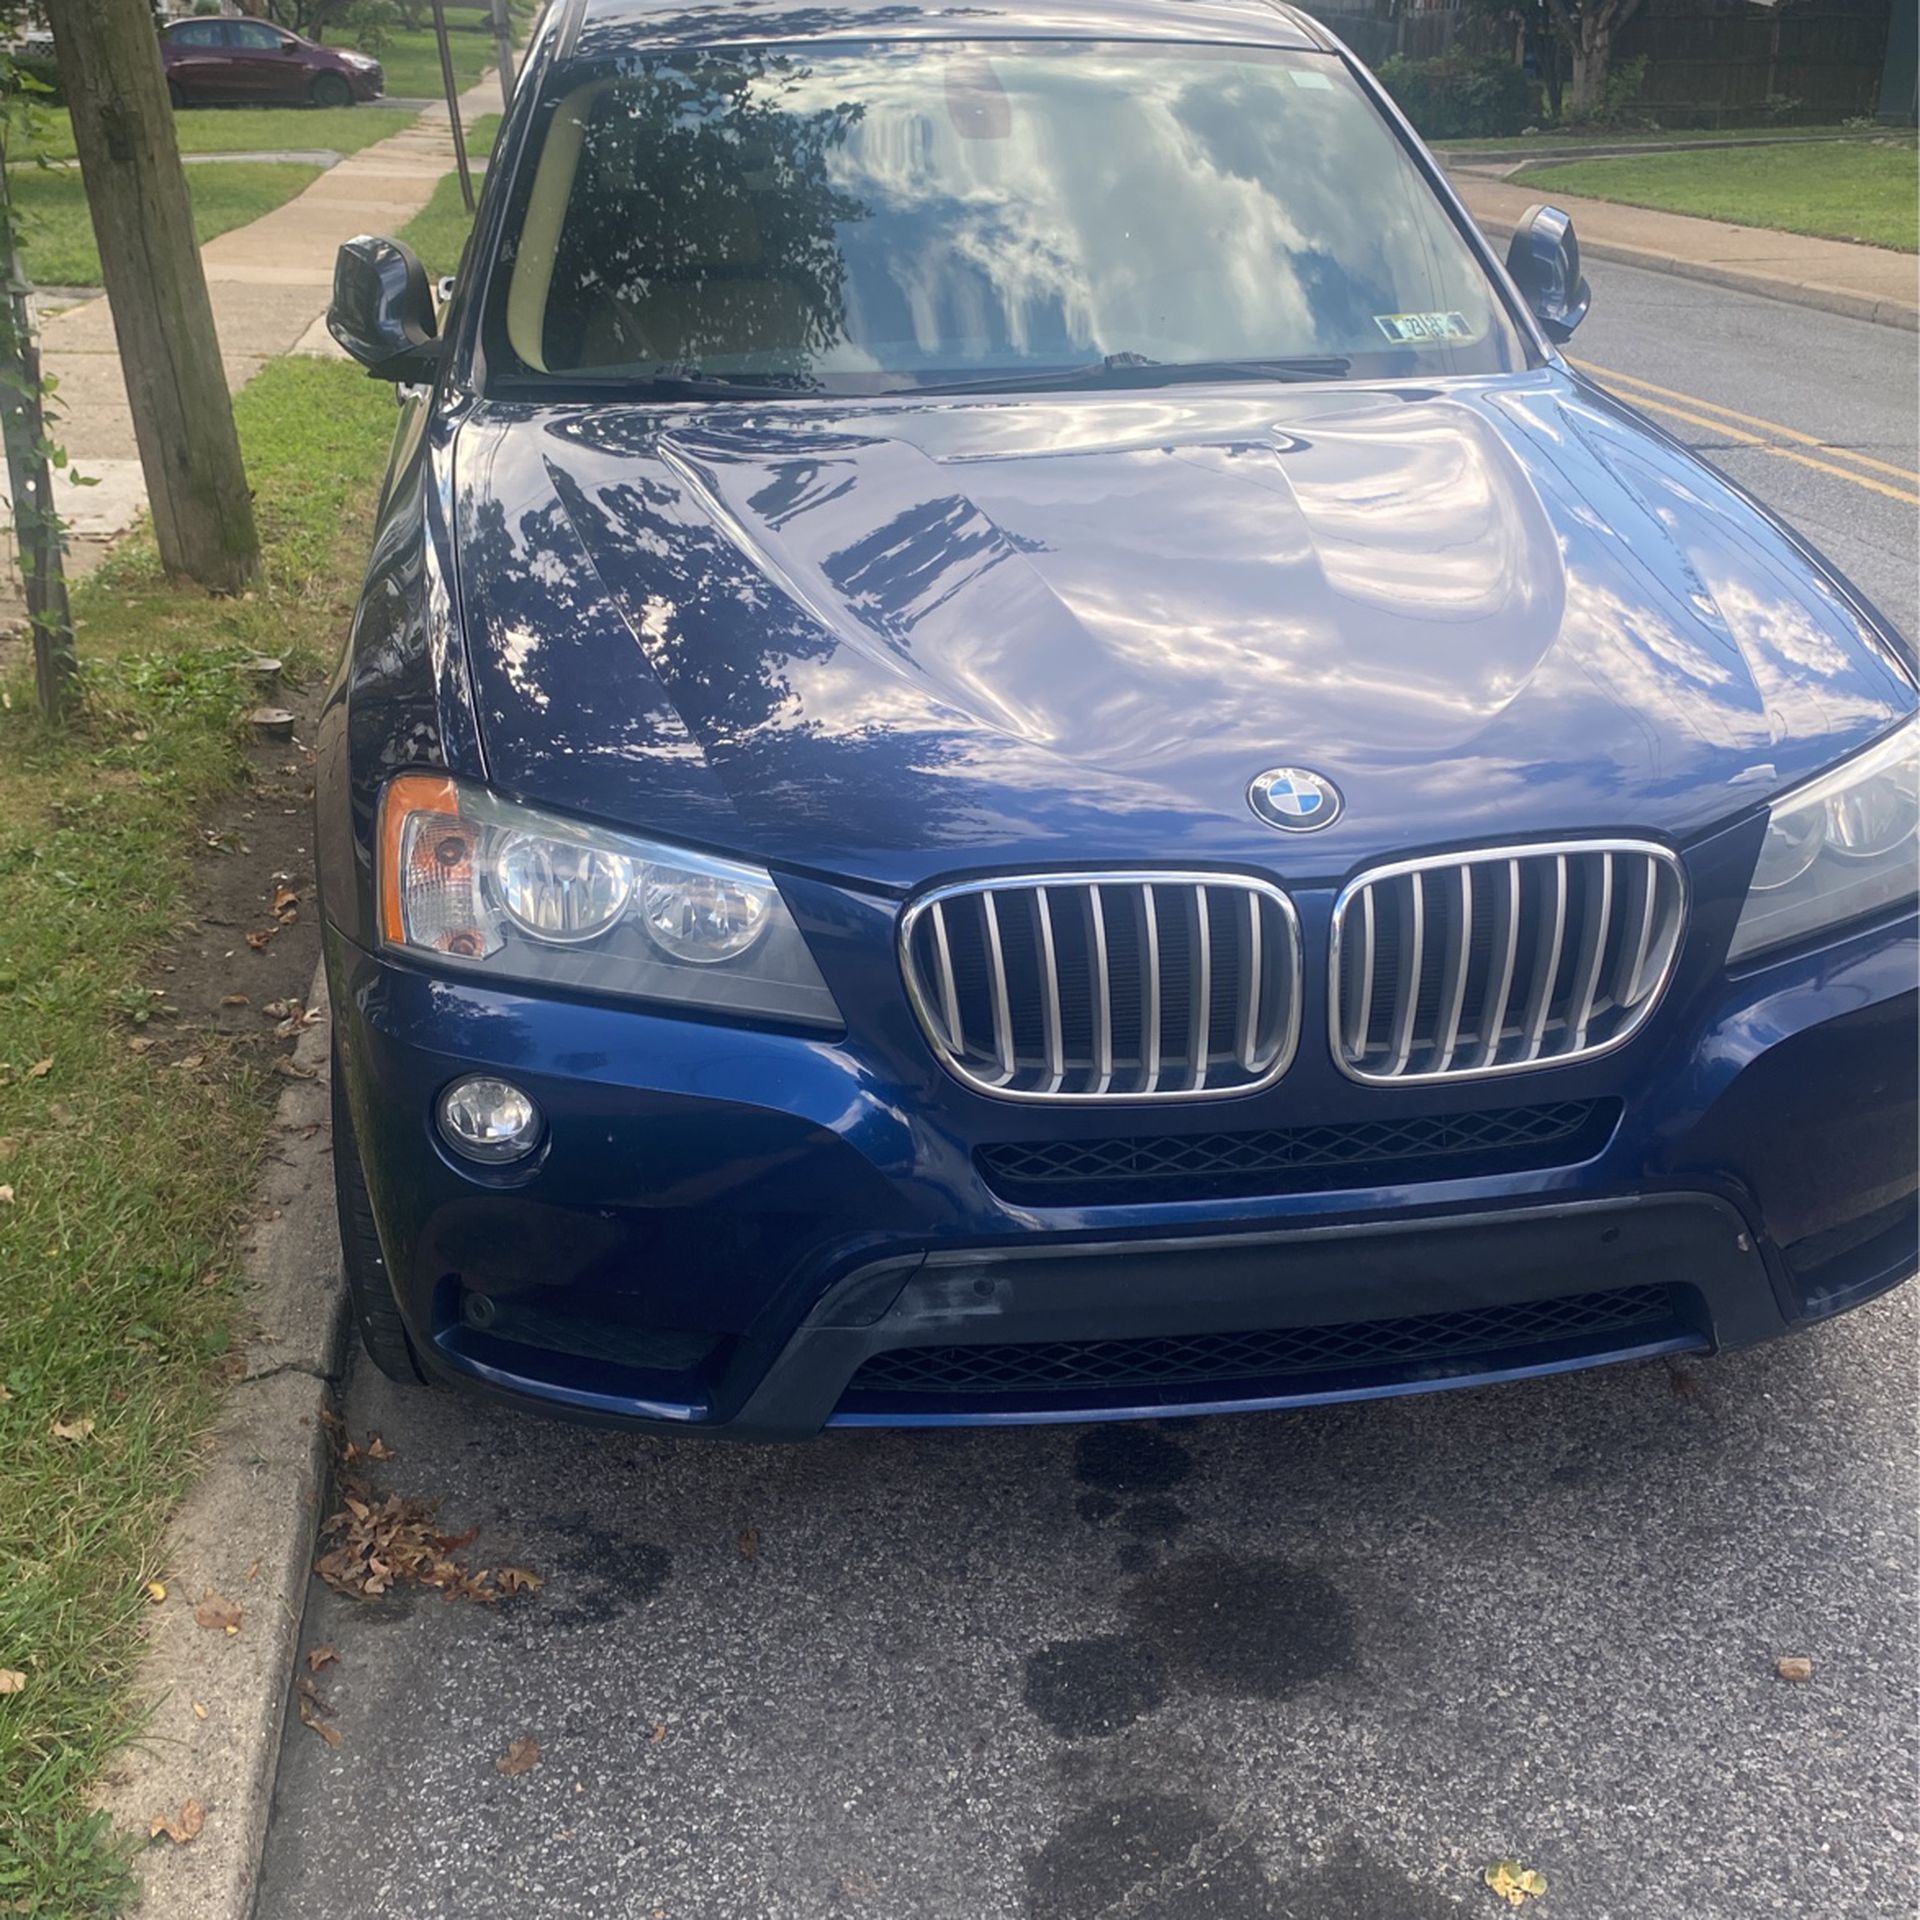 2011 Bmw X3 For Sale In Drexel Hill Pa Offerup